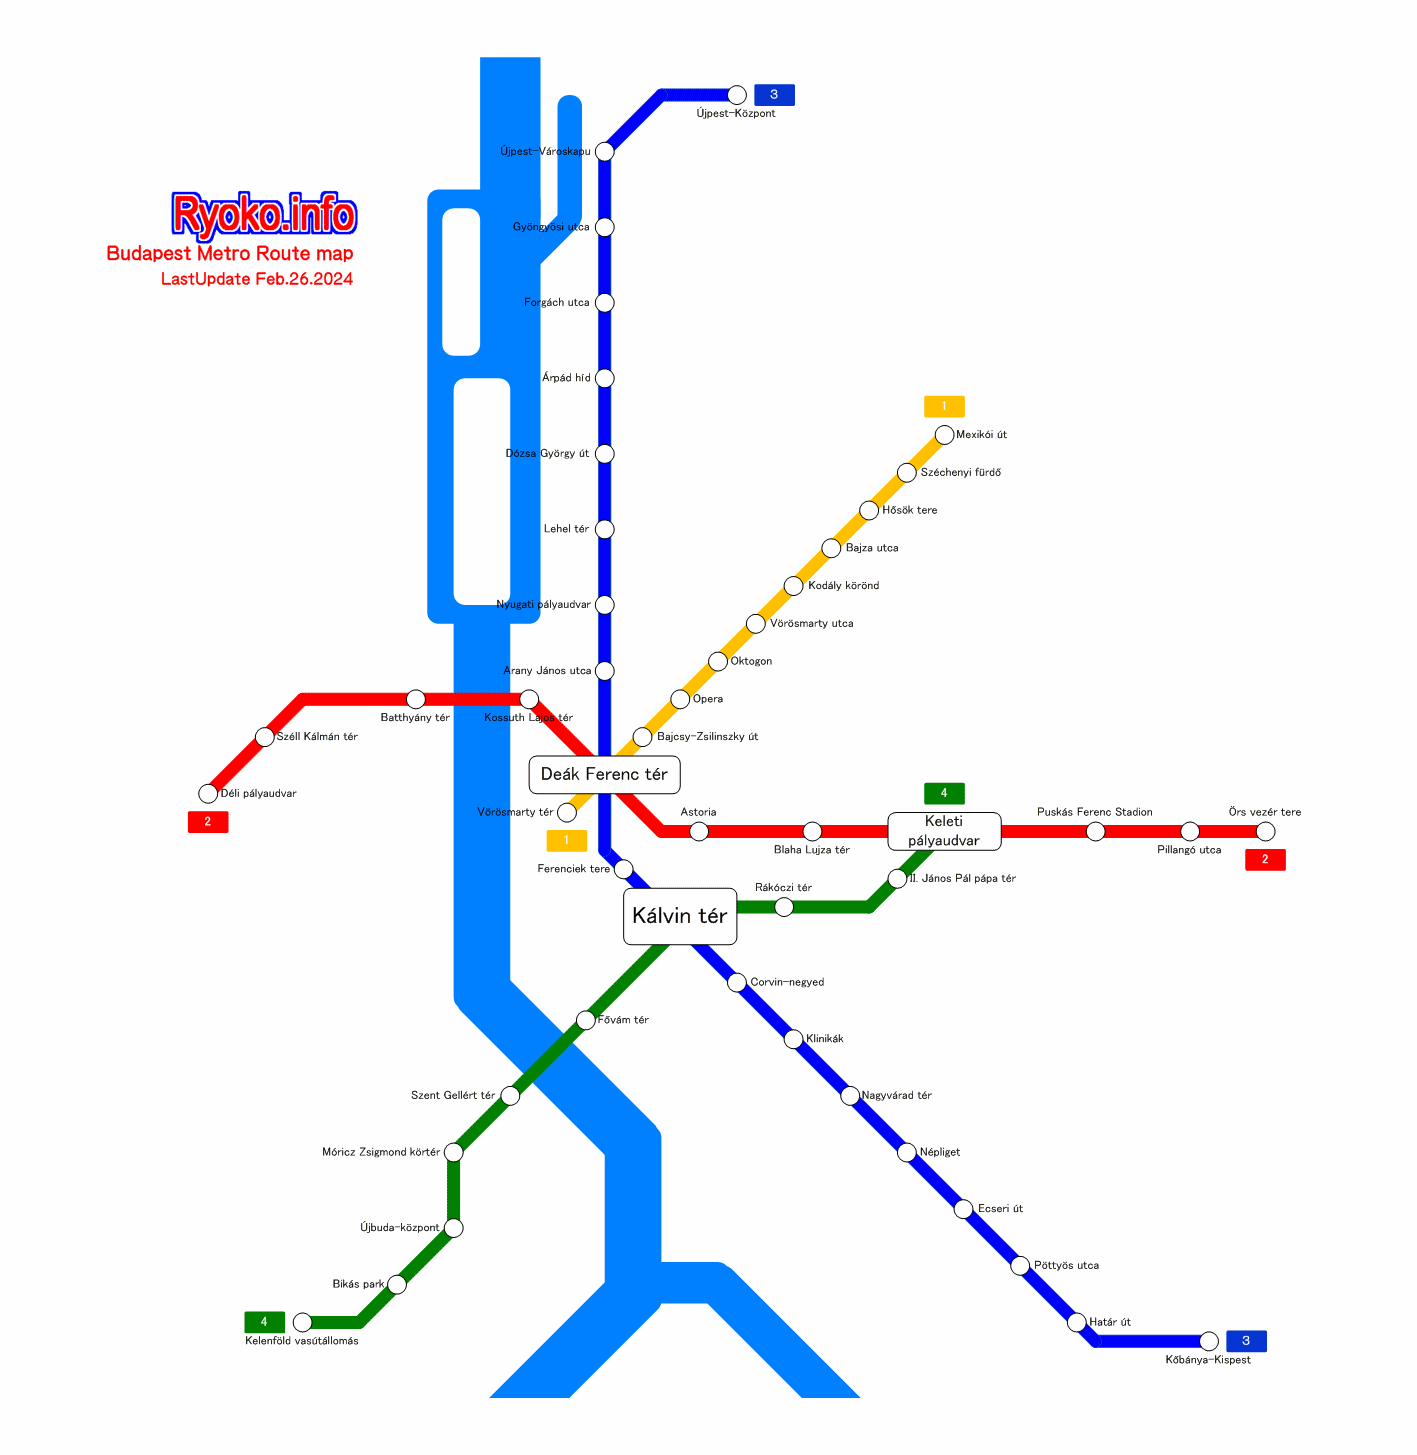 Budapest Metro Route Map